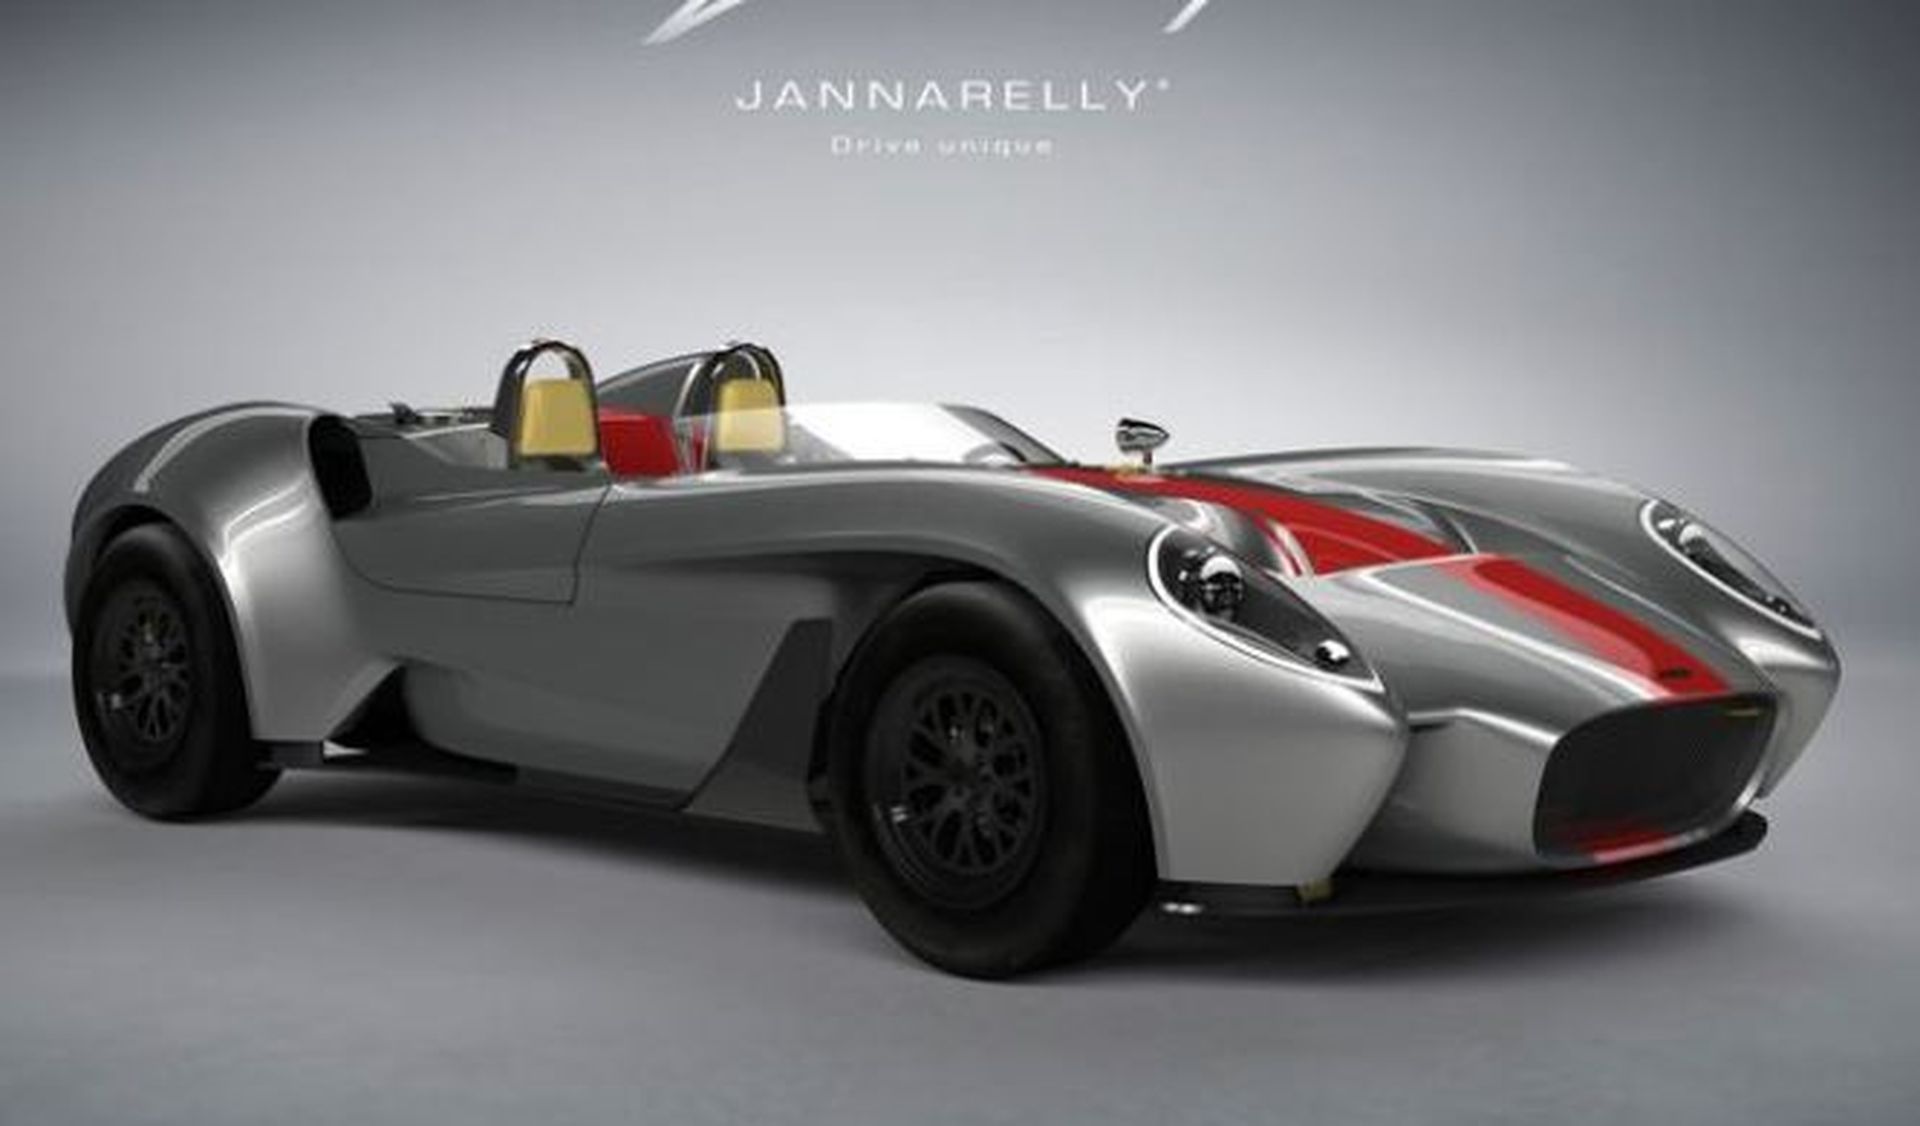 Jannarelly Design-1 frontal